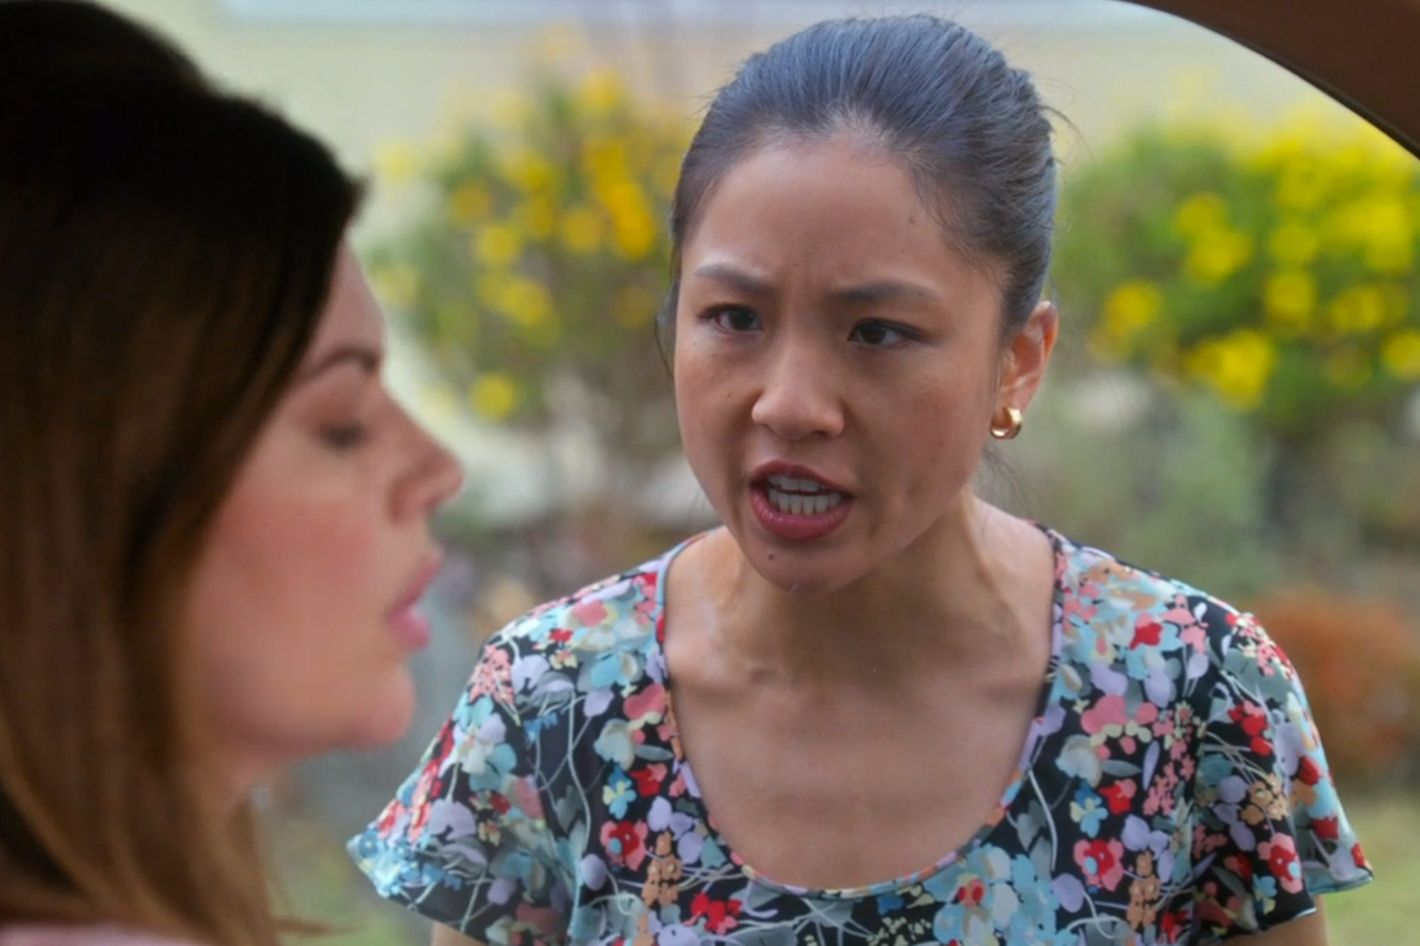 L+7 Ratings for Week of Feb. 17: 'Fresh Off the Boat' Finale Ticks Up